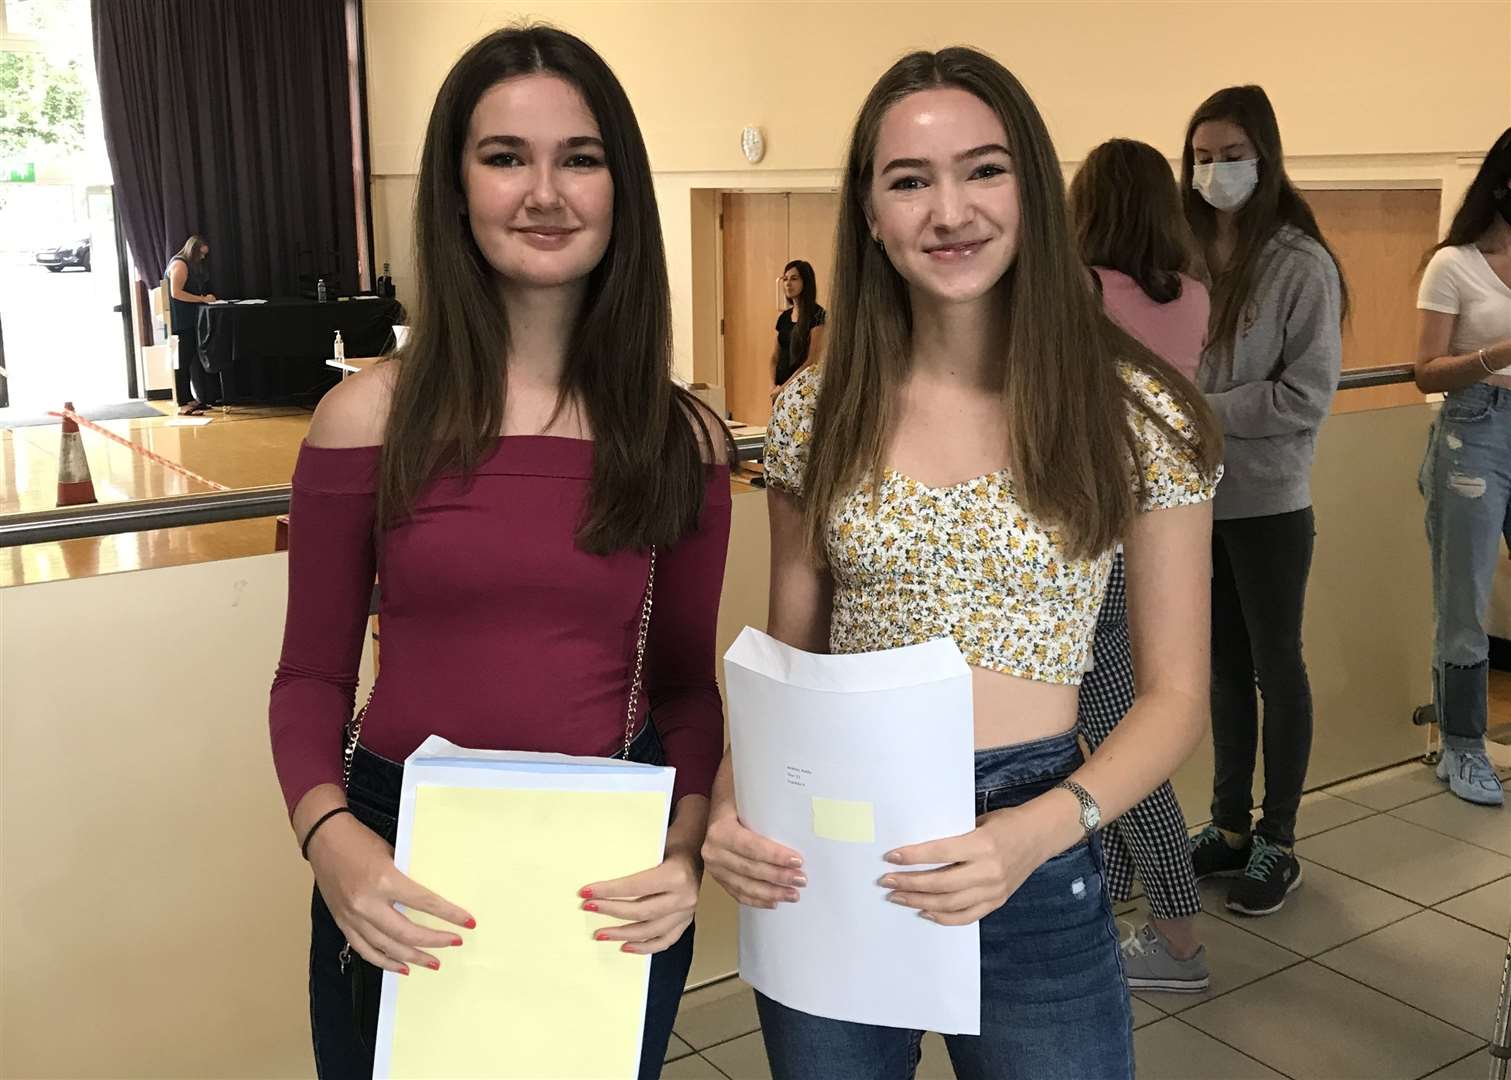 Emily Jenkins and Maia Fullalove, of Highsted Grammar School, with their results